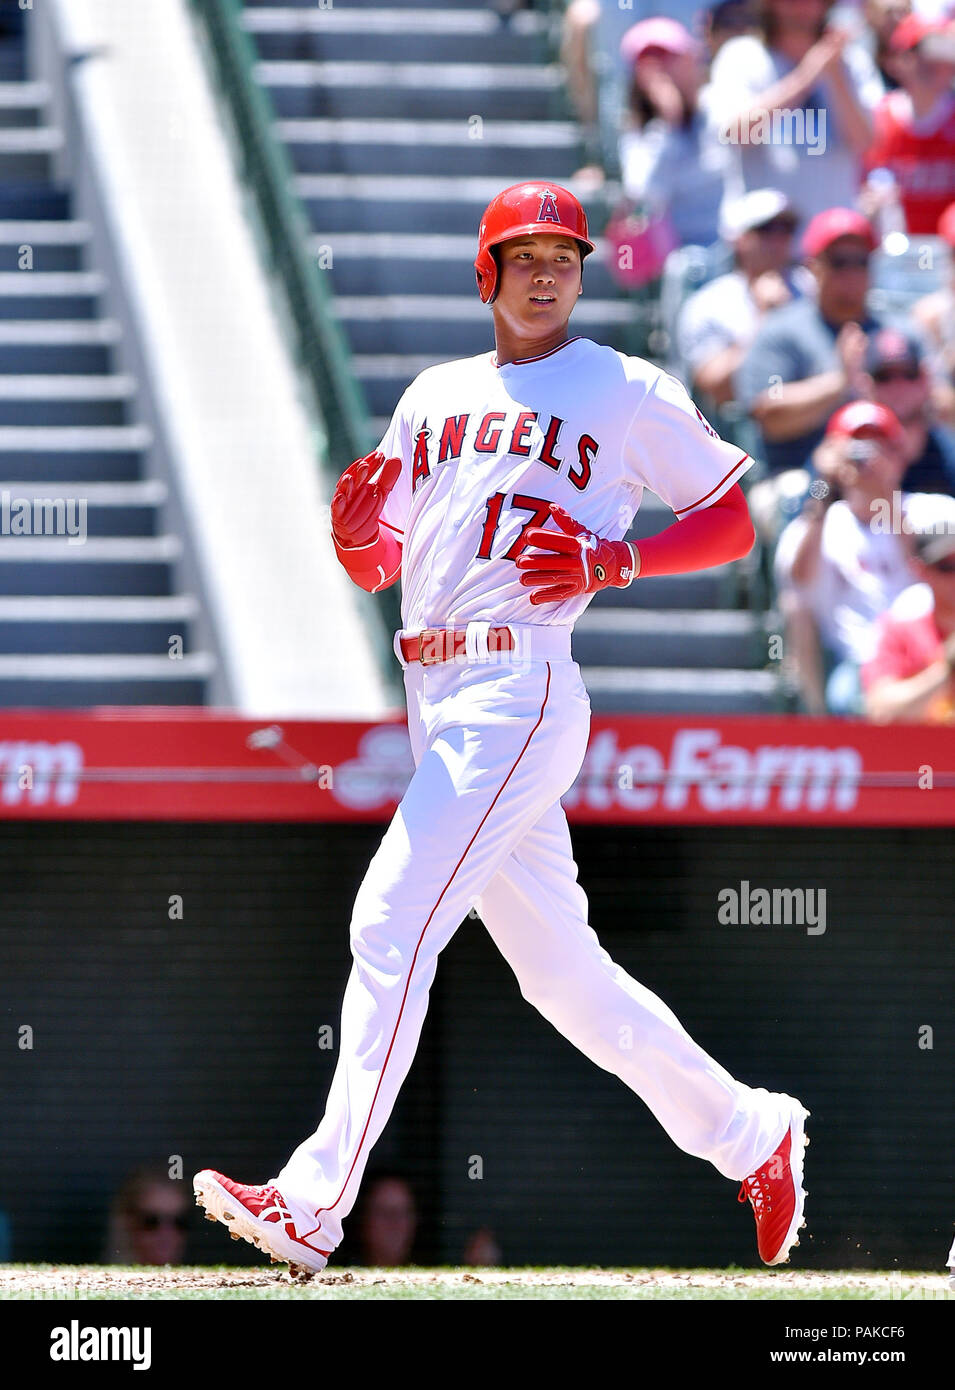 Los Angeles Angels designated hitter Shohei Ohtani crosses home plate to score on an RBI double by Luis Valbuena (not pictured) during the Major League Baseball game against the Texas Rangers at Angel Stadium in Anaheim, California, United States, June 3, 2018. Credit: AFLO/Alamy Live News Stock Photo